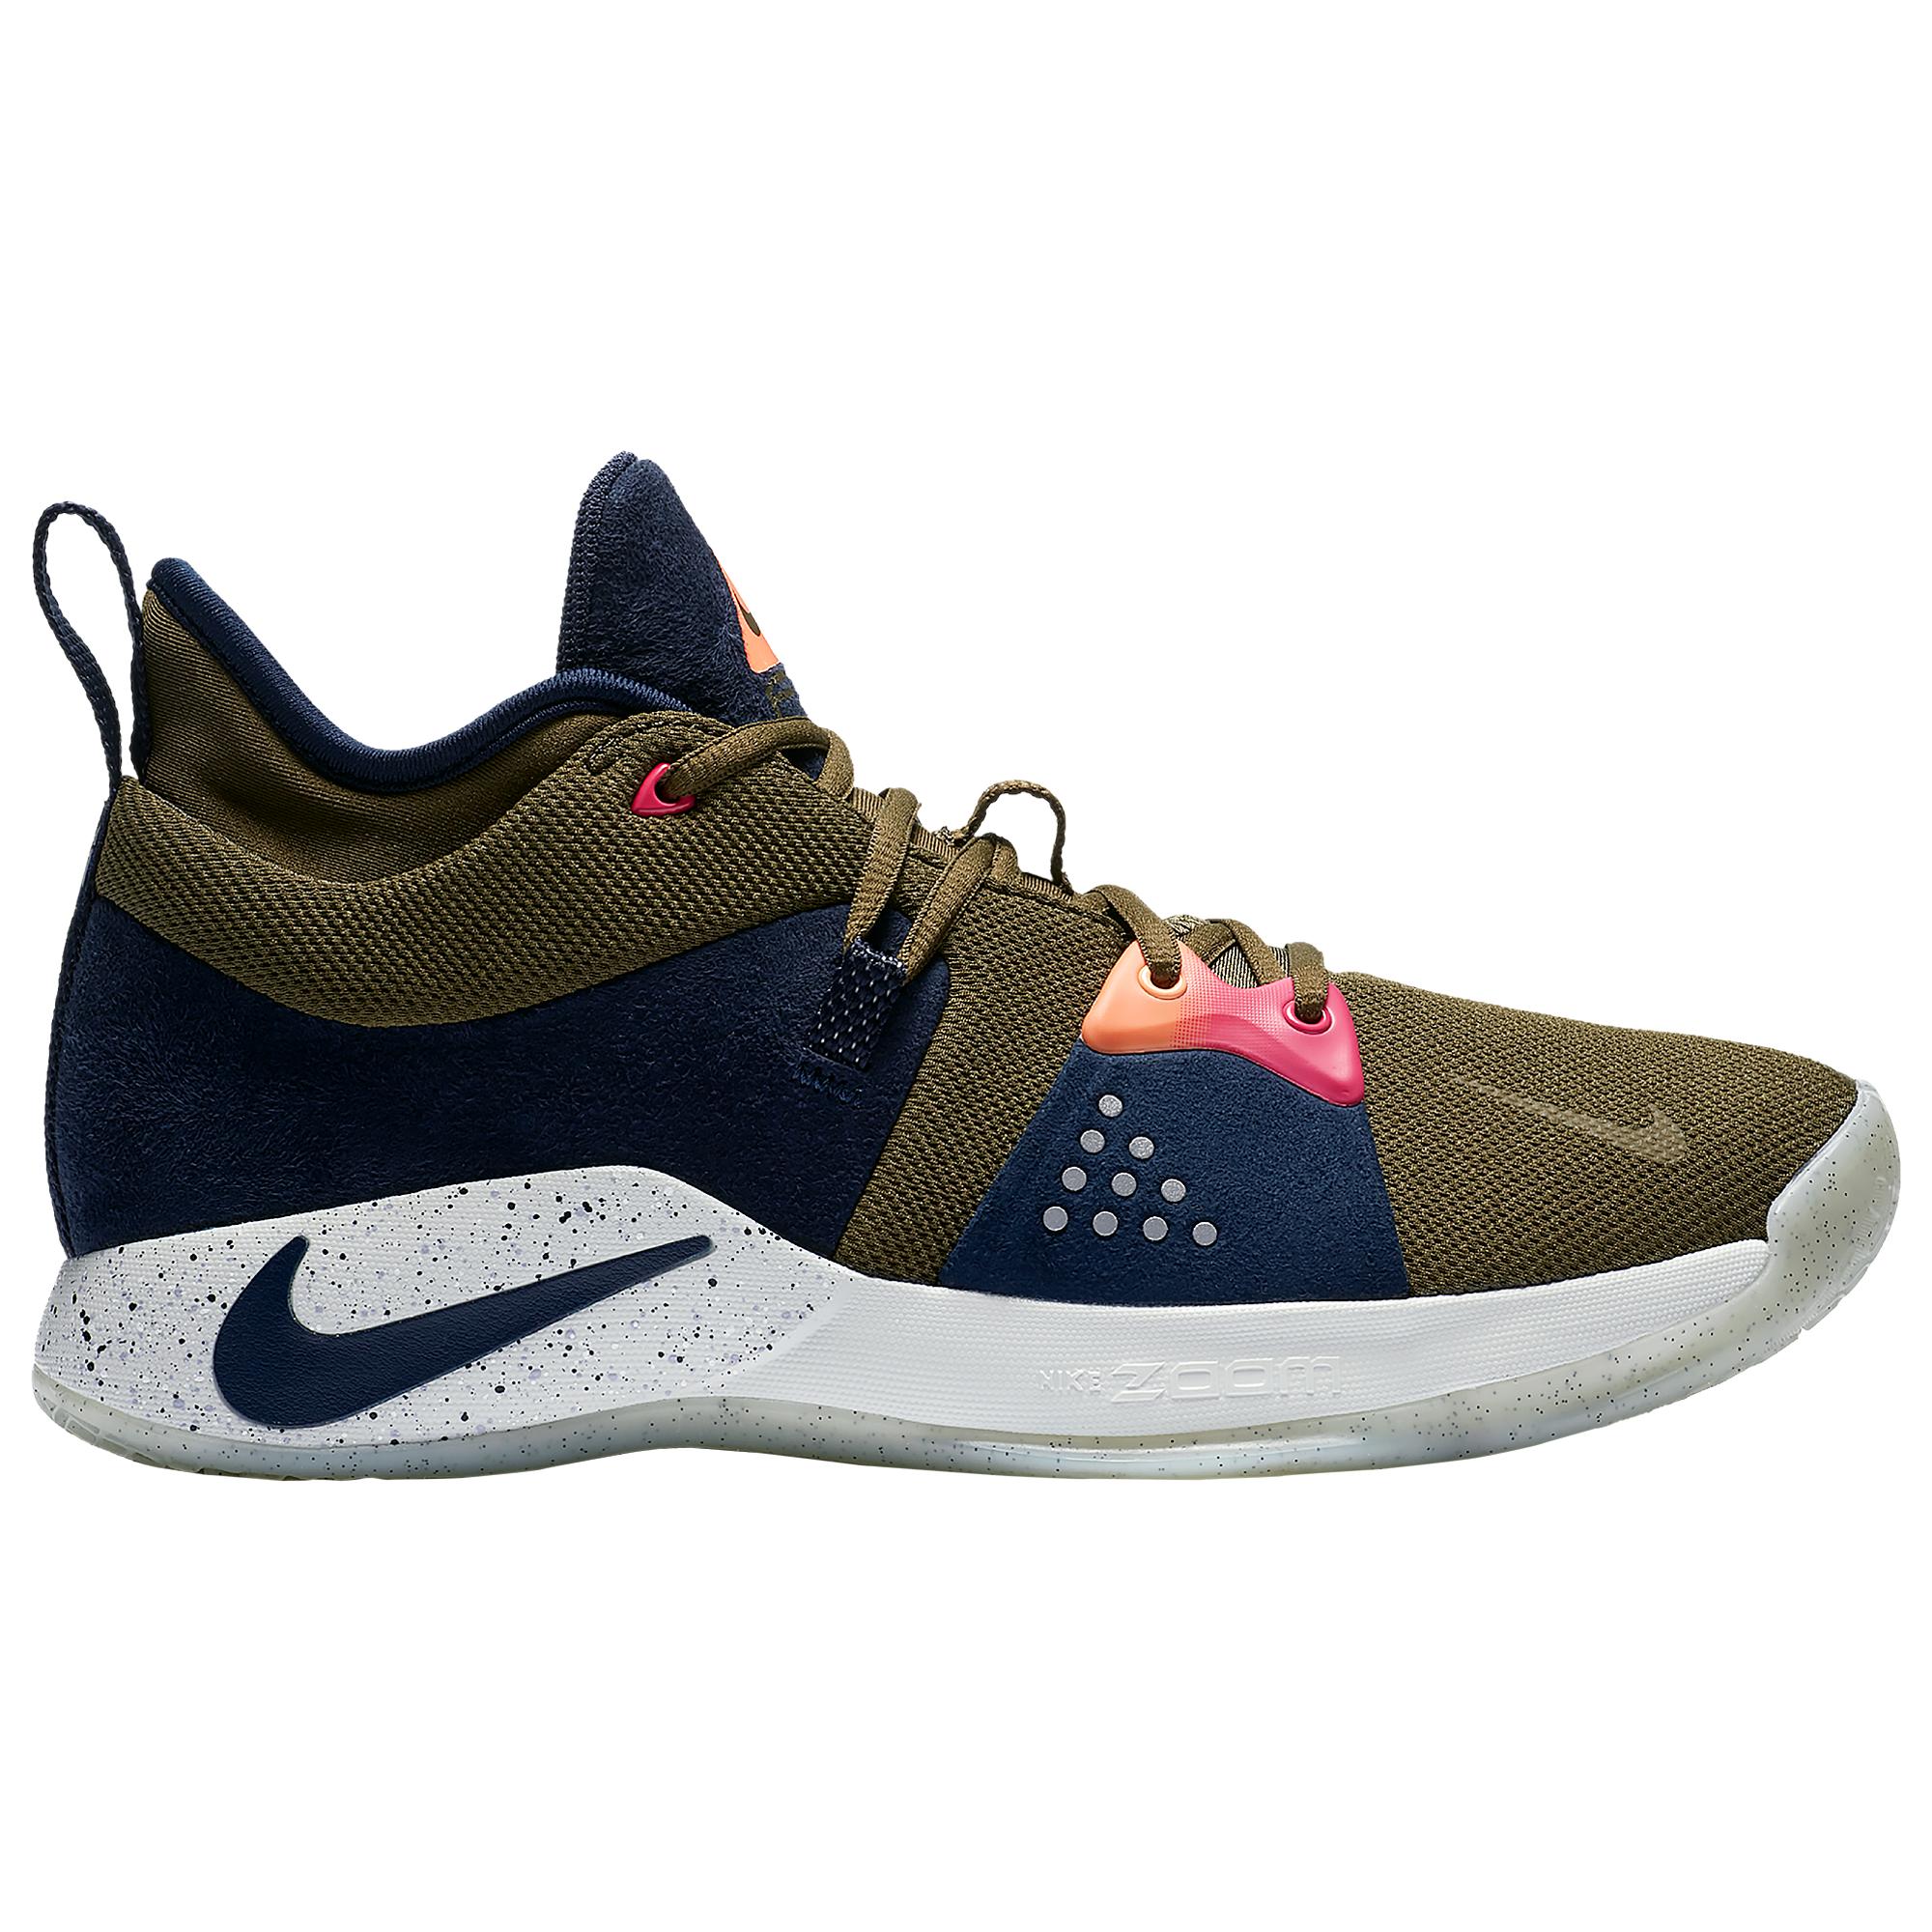 Nike Rubber Pg 2 Basketball Shoes in Blue for Men - Lyst